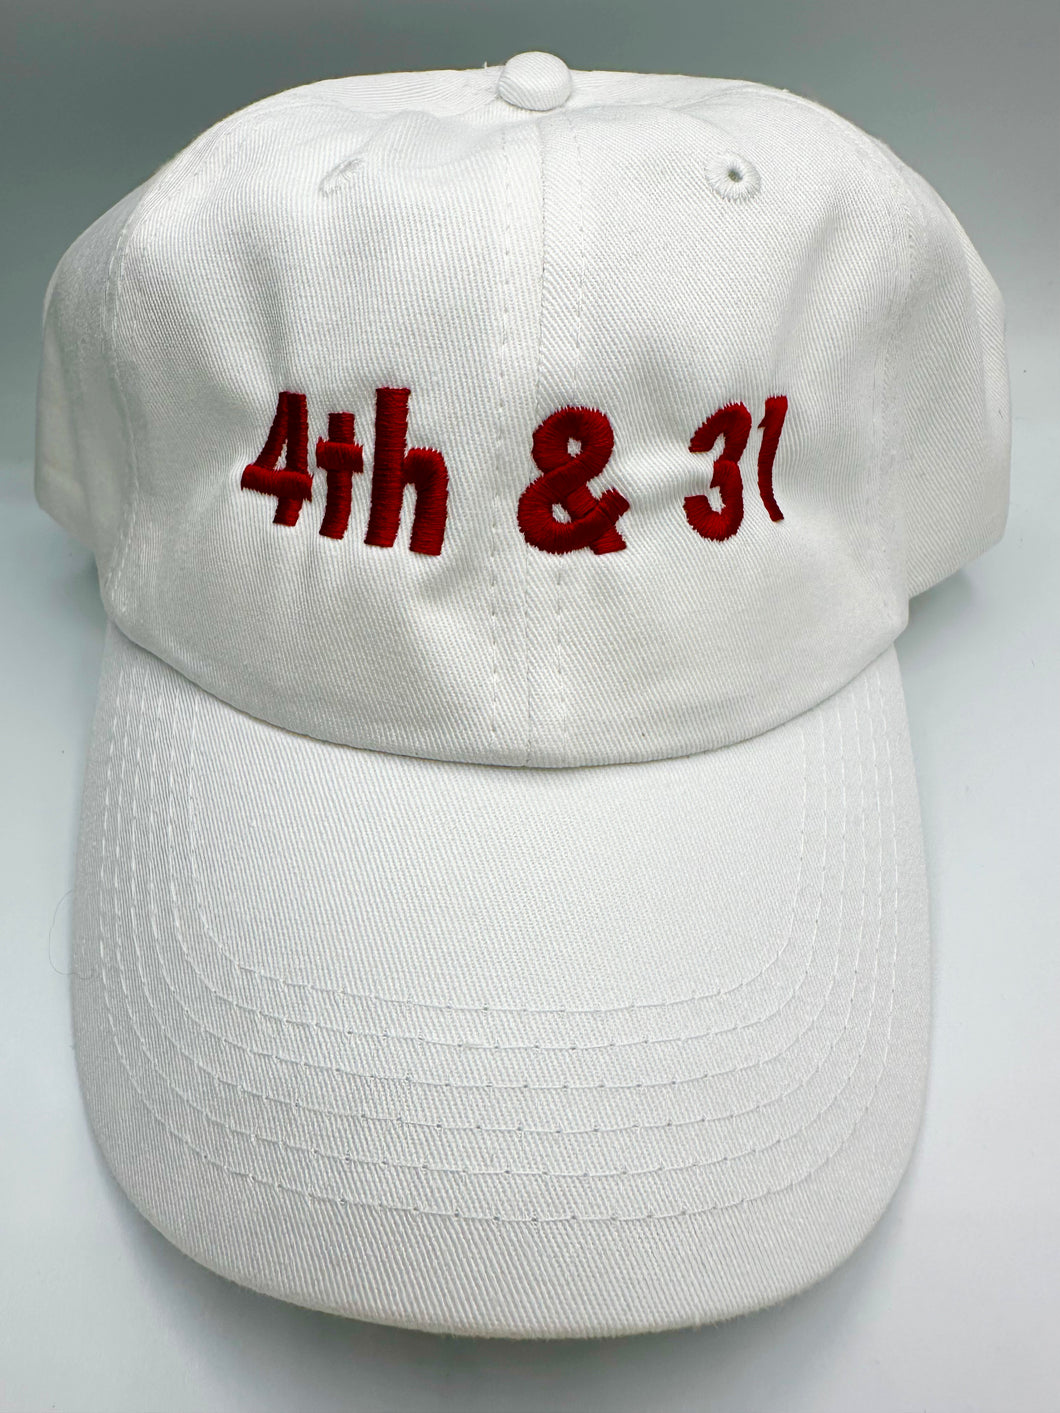 4th & 31 White Game Day Unstructured Custom Cap Hat